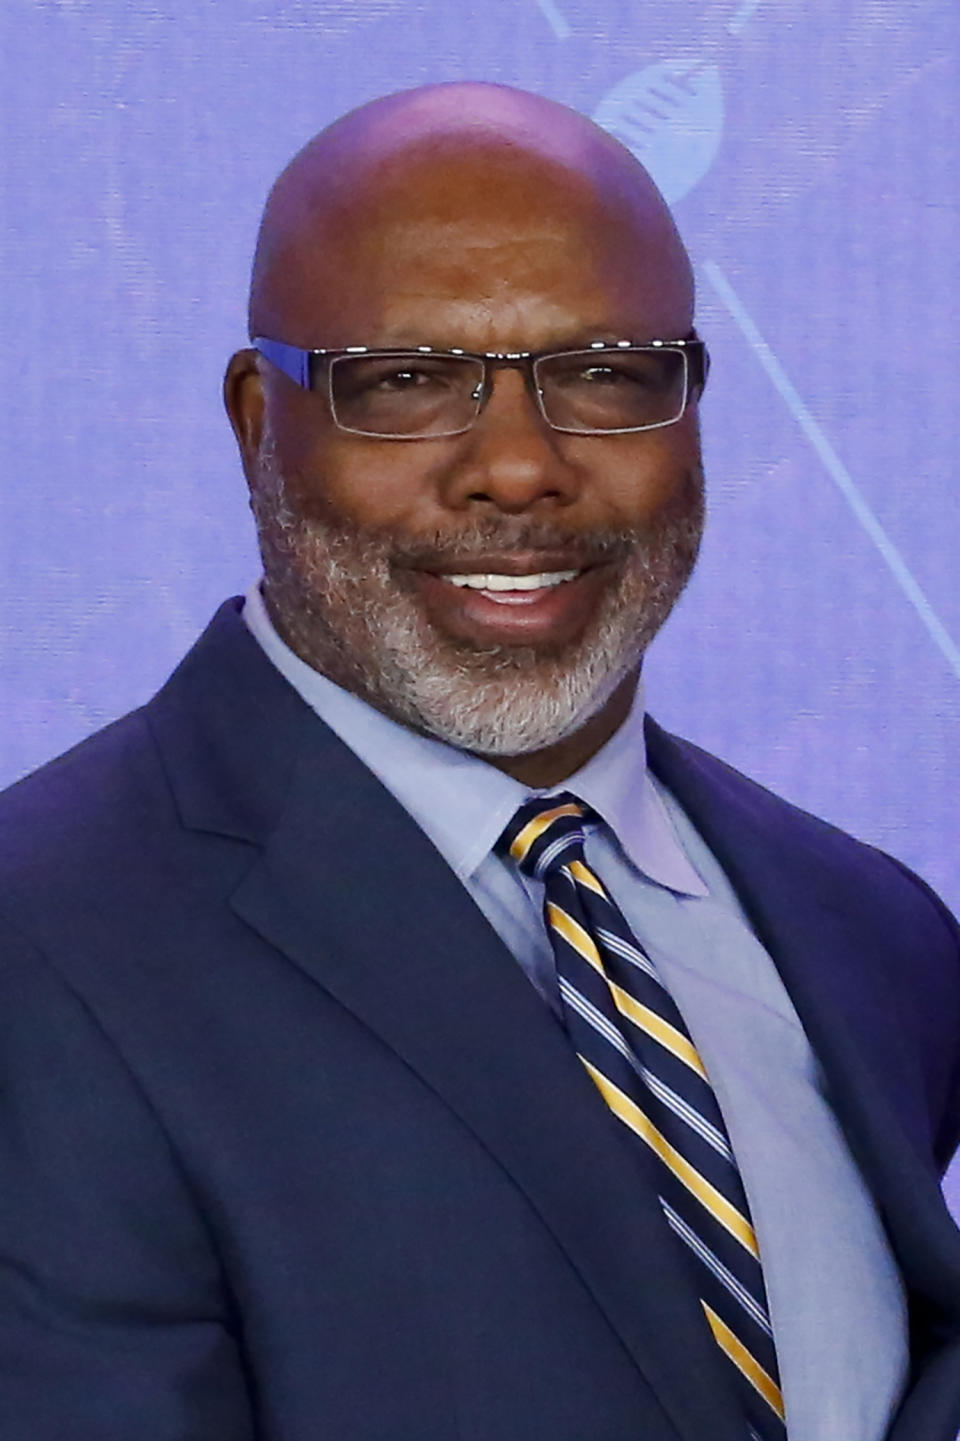 FILE - In this Aug. 6, 2016, file photo, former NFL player Donnie Shell smiles during induction ceremonies for former teammate Tony Dungy (not shown), in Canton, Ohio. Donnie Shell knew he was ahead of his time. It's why the Pittsburgh Steelers safety never worried about whether he'd get into the Hall of Fame. His long wait ended this week, when he got the call more than 30 years after playing his final game. (AP Photo/Gene J. Puskar)